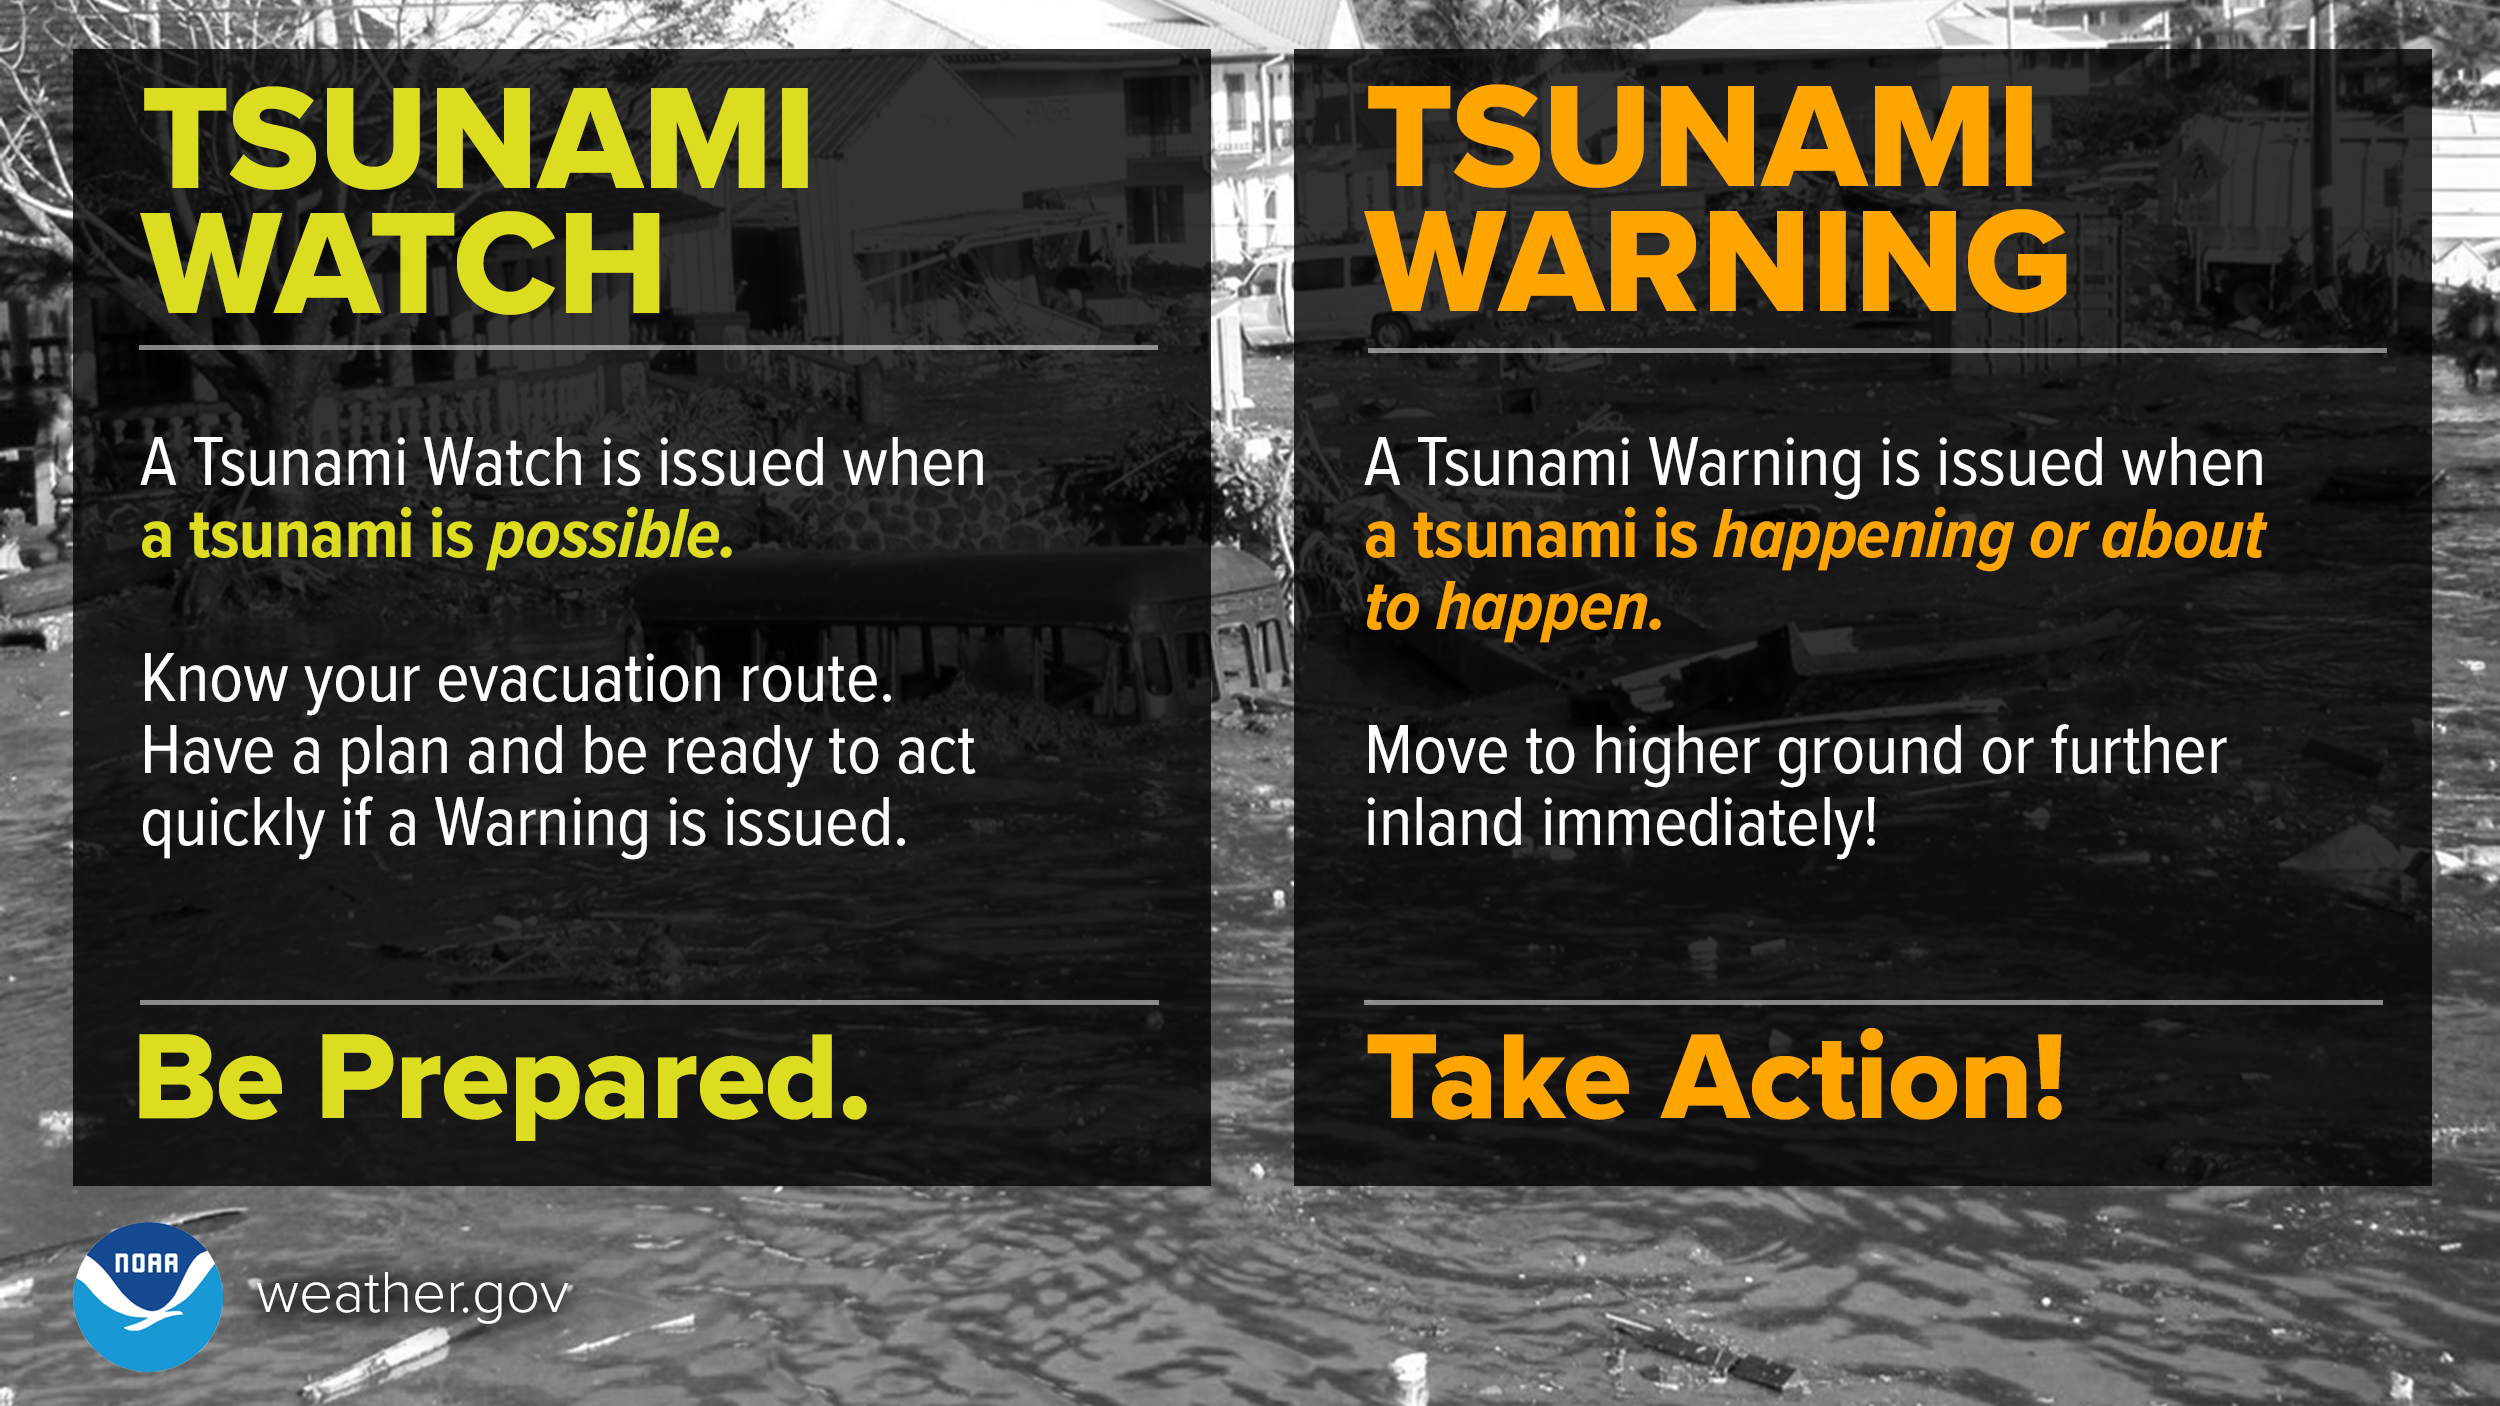 Tsunami Watch means be prepared. A Tsunami Watch is issued when a tsunami is possible. Know your evacuation route. Have a plan and be ready to act quickly if a Warning is issued. Tsunami Warning means take action! A Tsunami Warning is issued when a tsunami is happening or about to happen. Move to higher ground or further inland immediately!